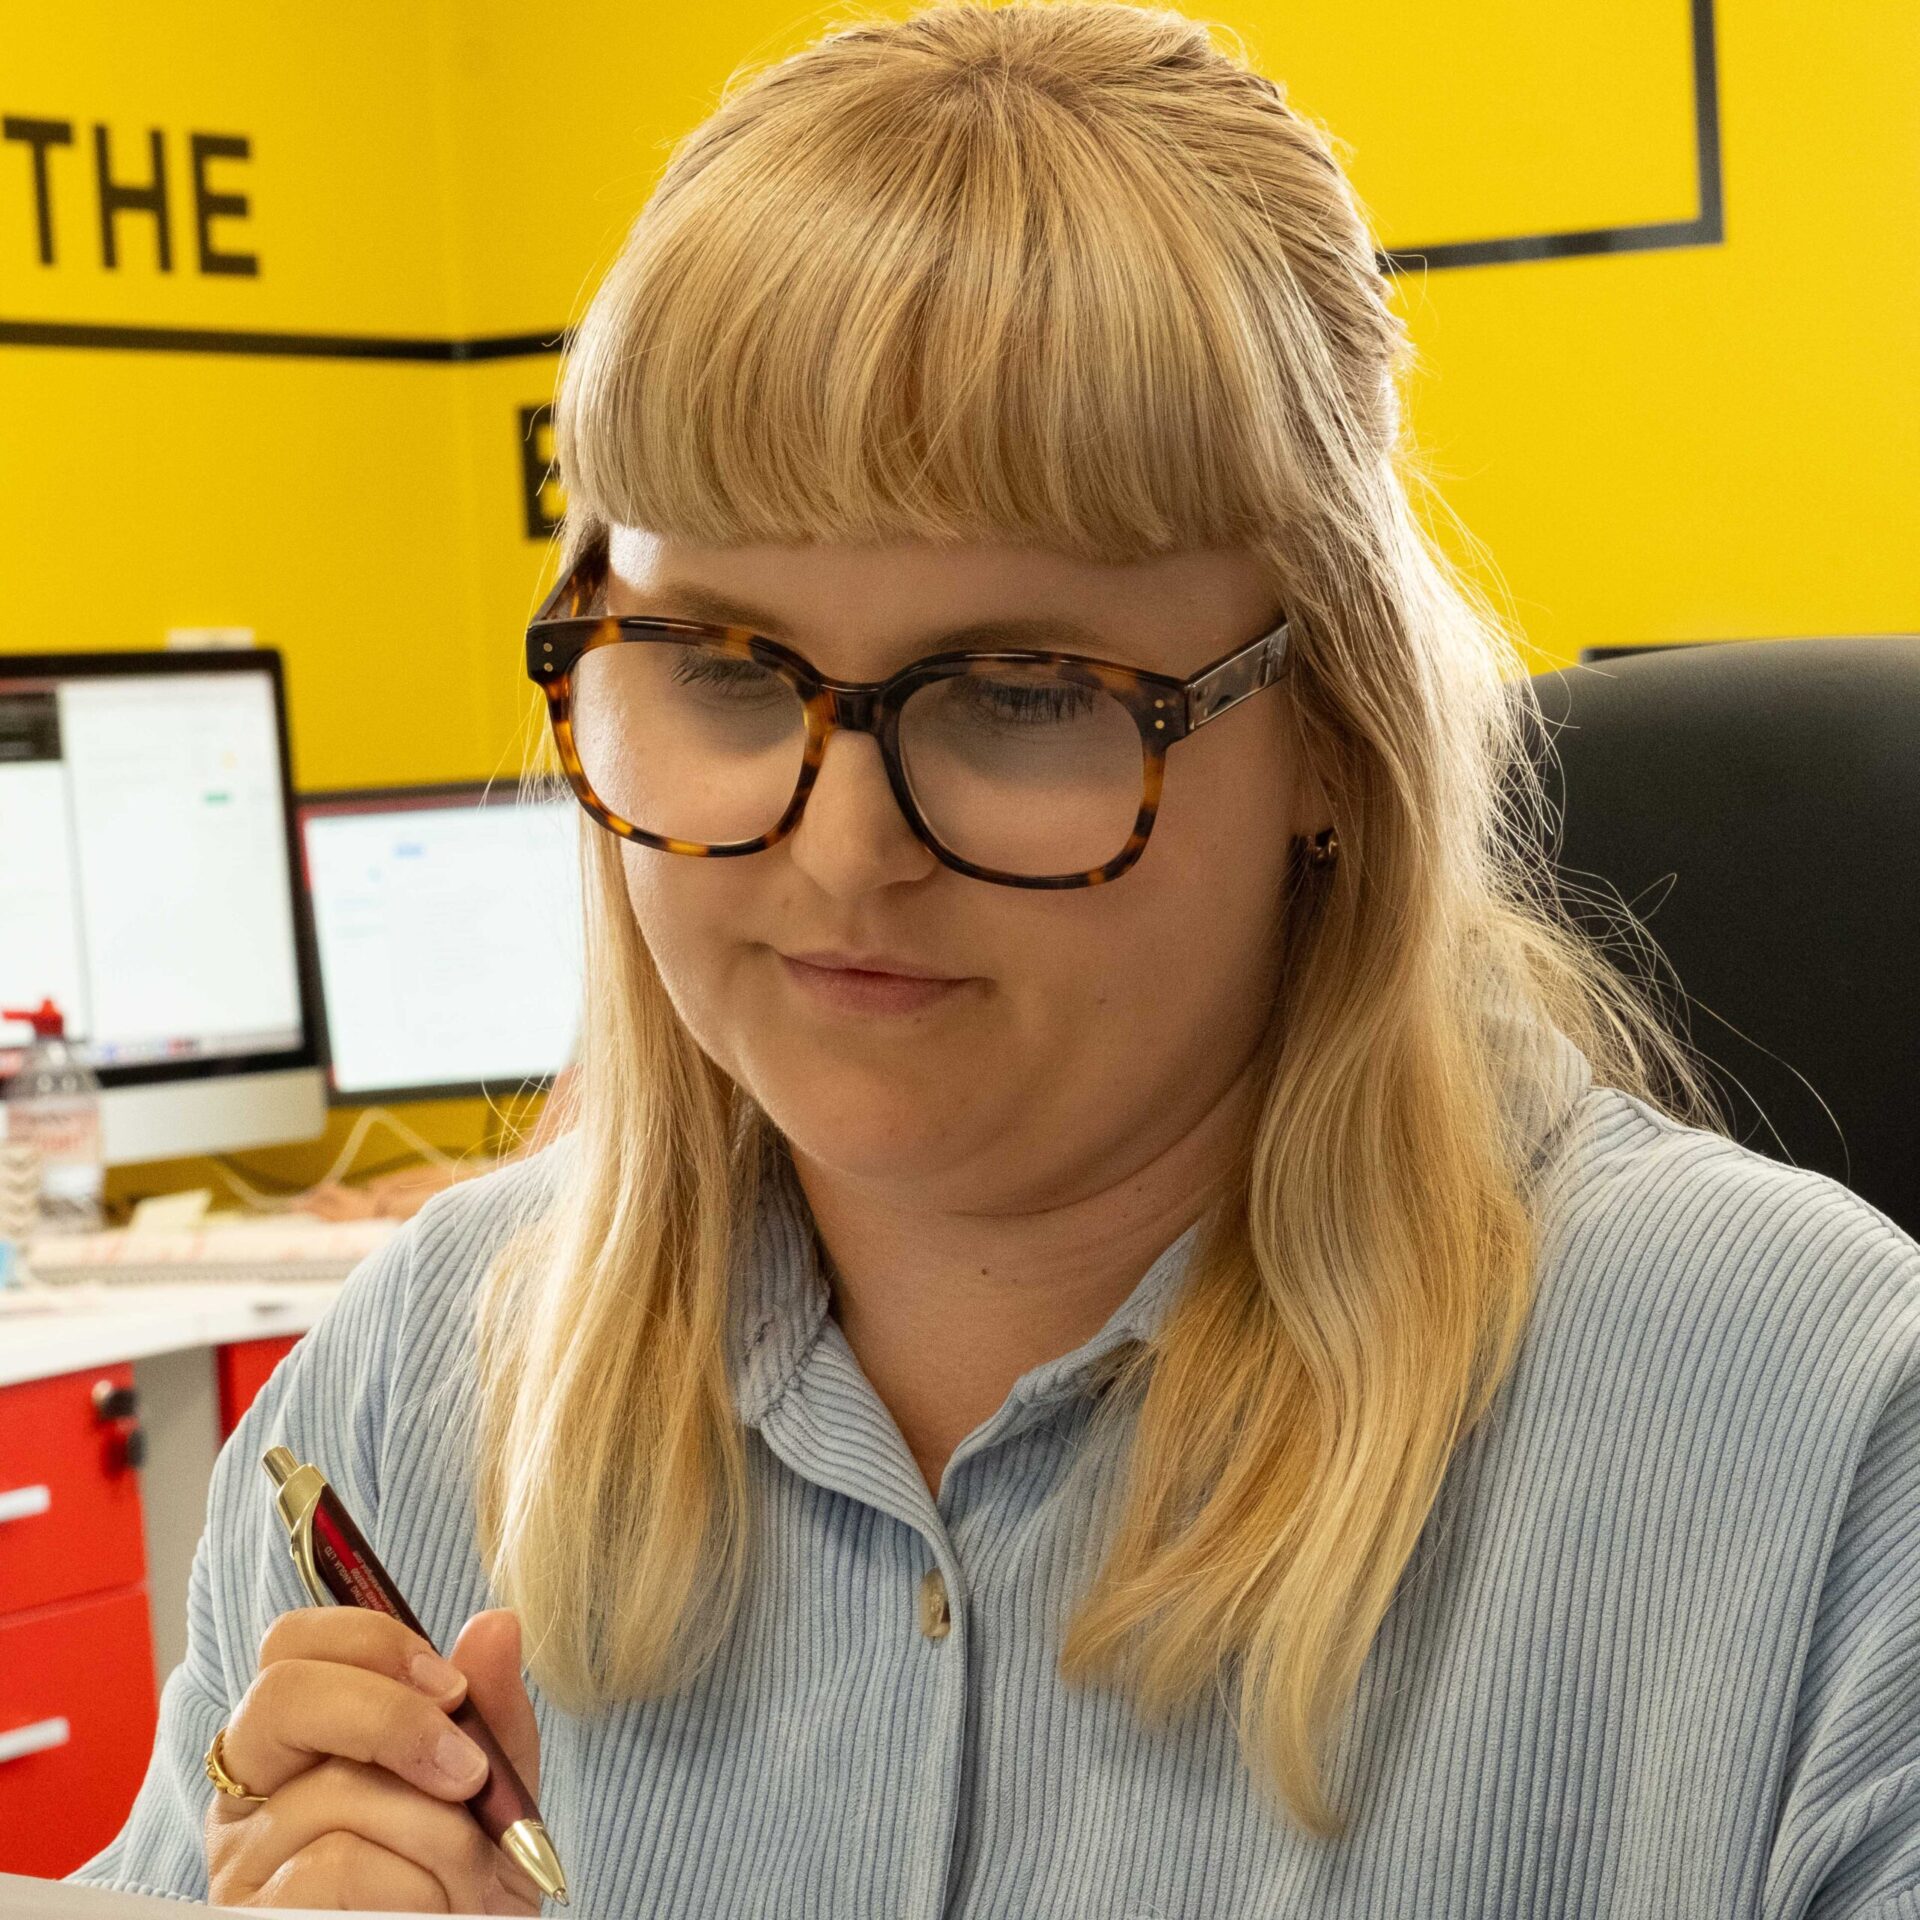 Rosie holding a pen looking to be reading something while sitting In the office with the rest of the team.